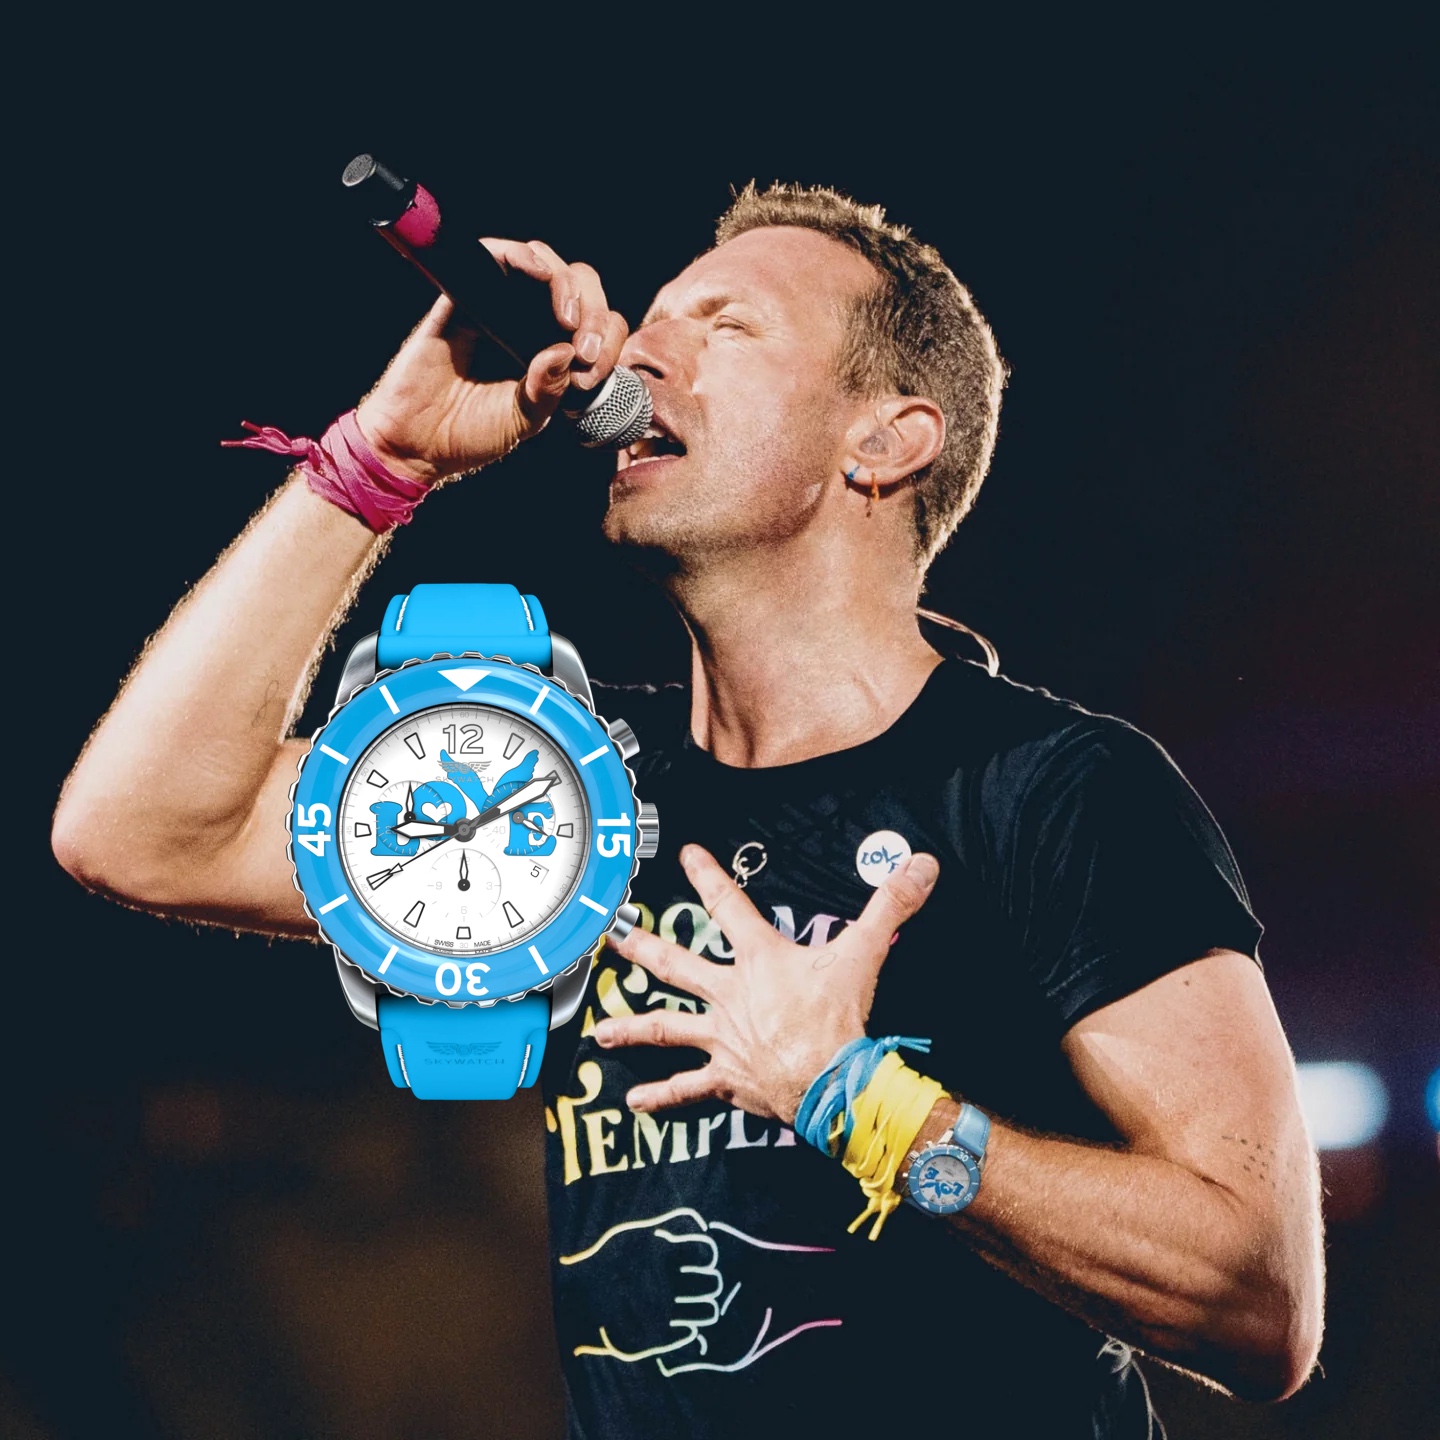 Did you know Coldplay’s Chris Martin co-designed a dive watch collab?